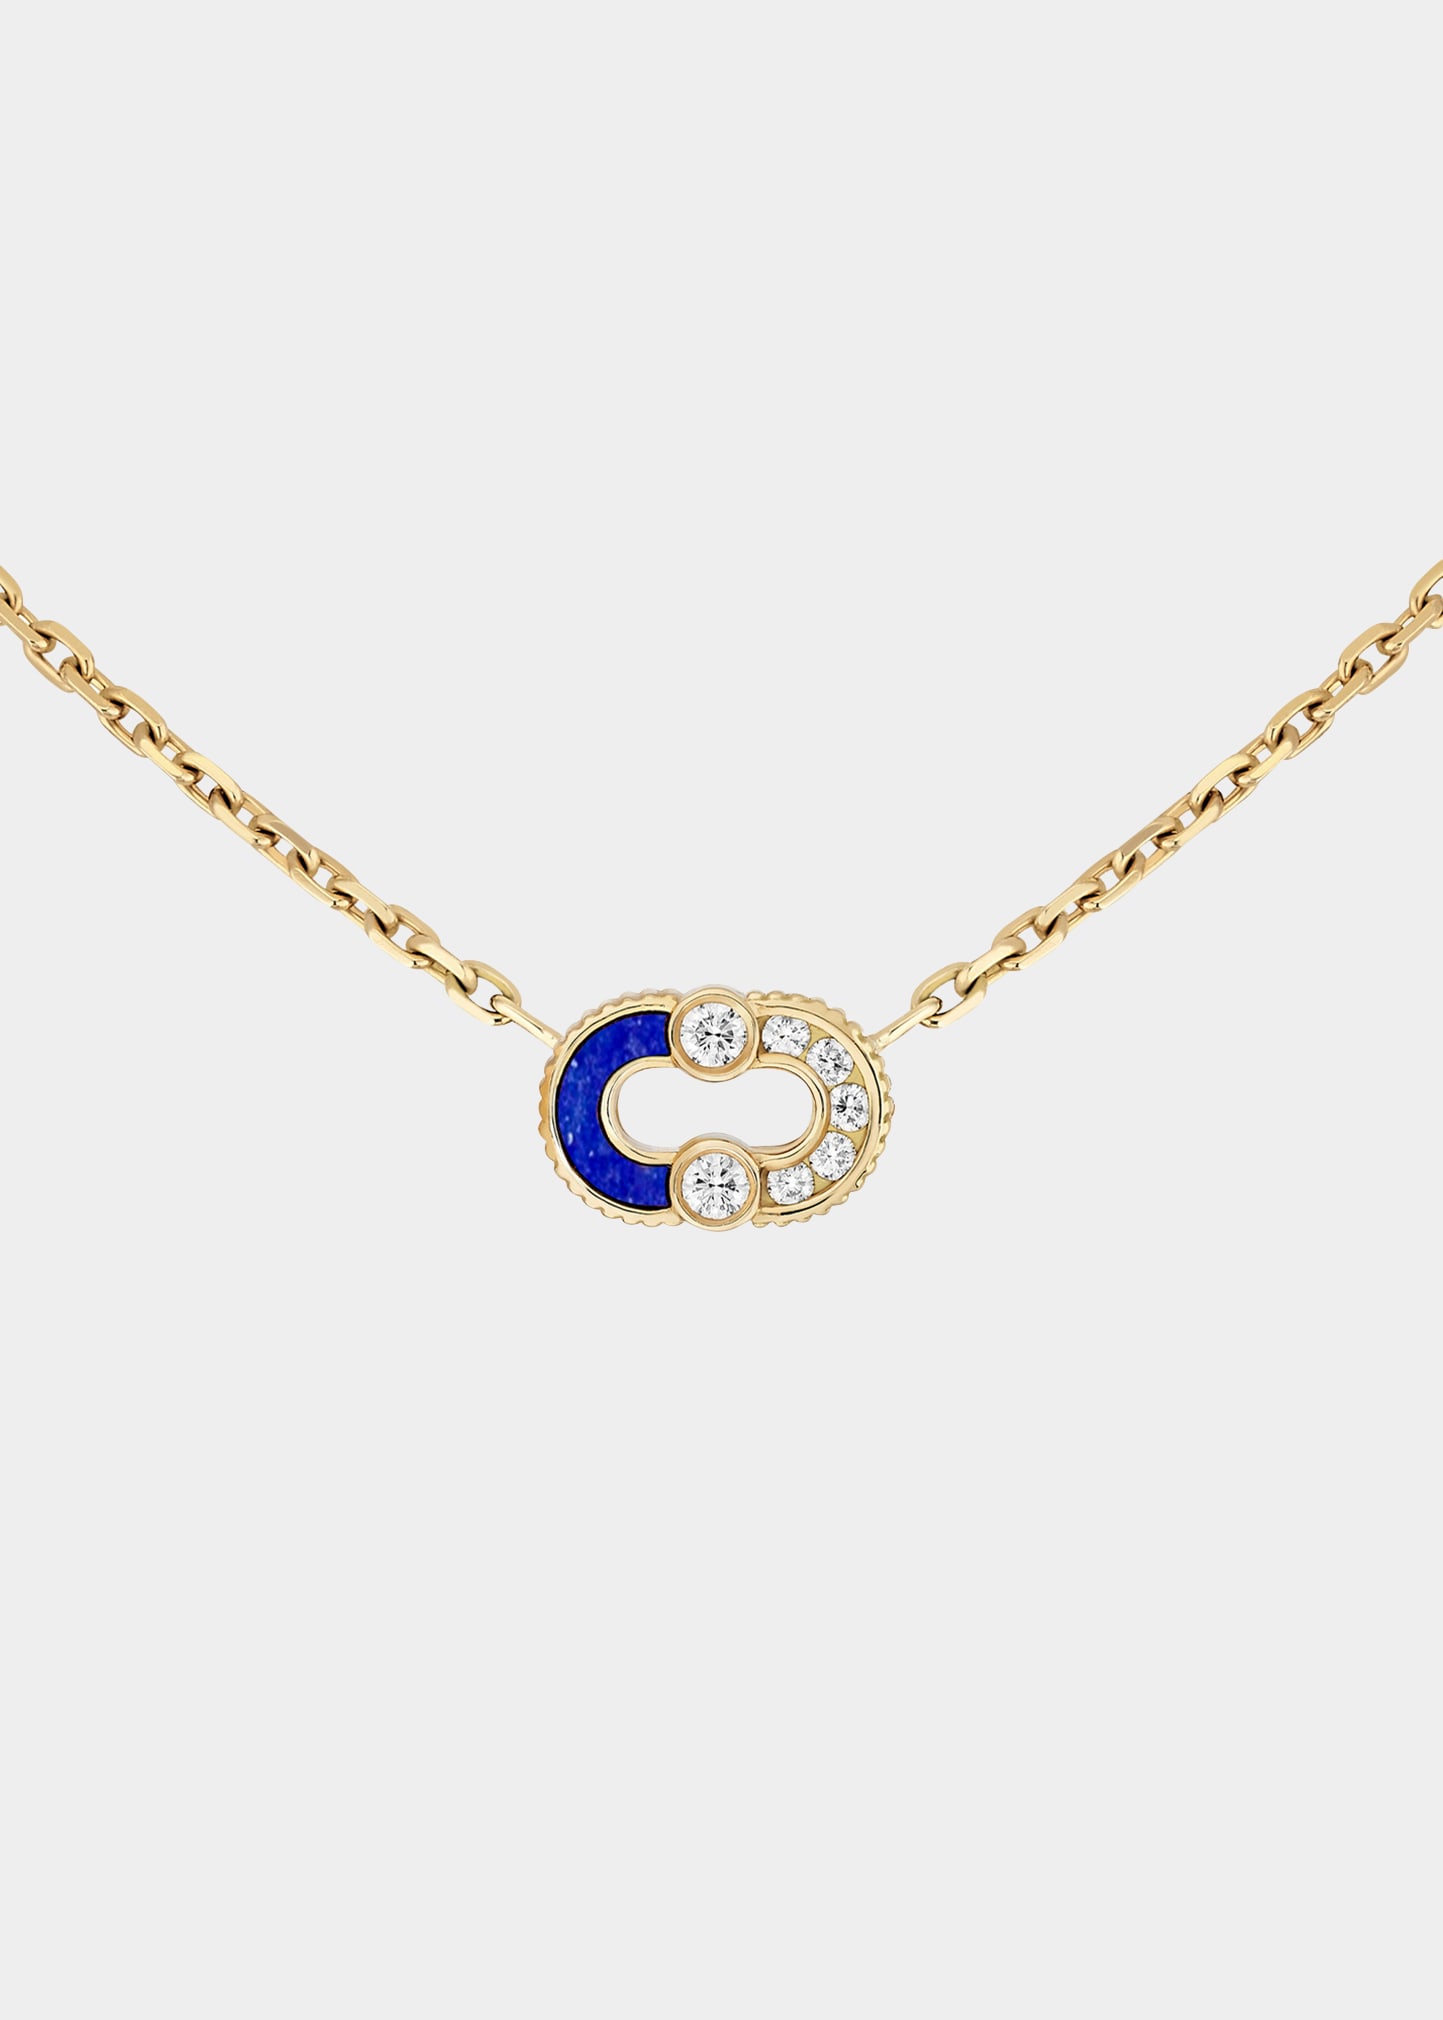 Magnetic Semi Necklace in Lapis Lazuli, 18K Yellow Gold and Diamonds